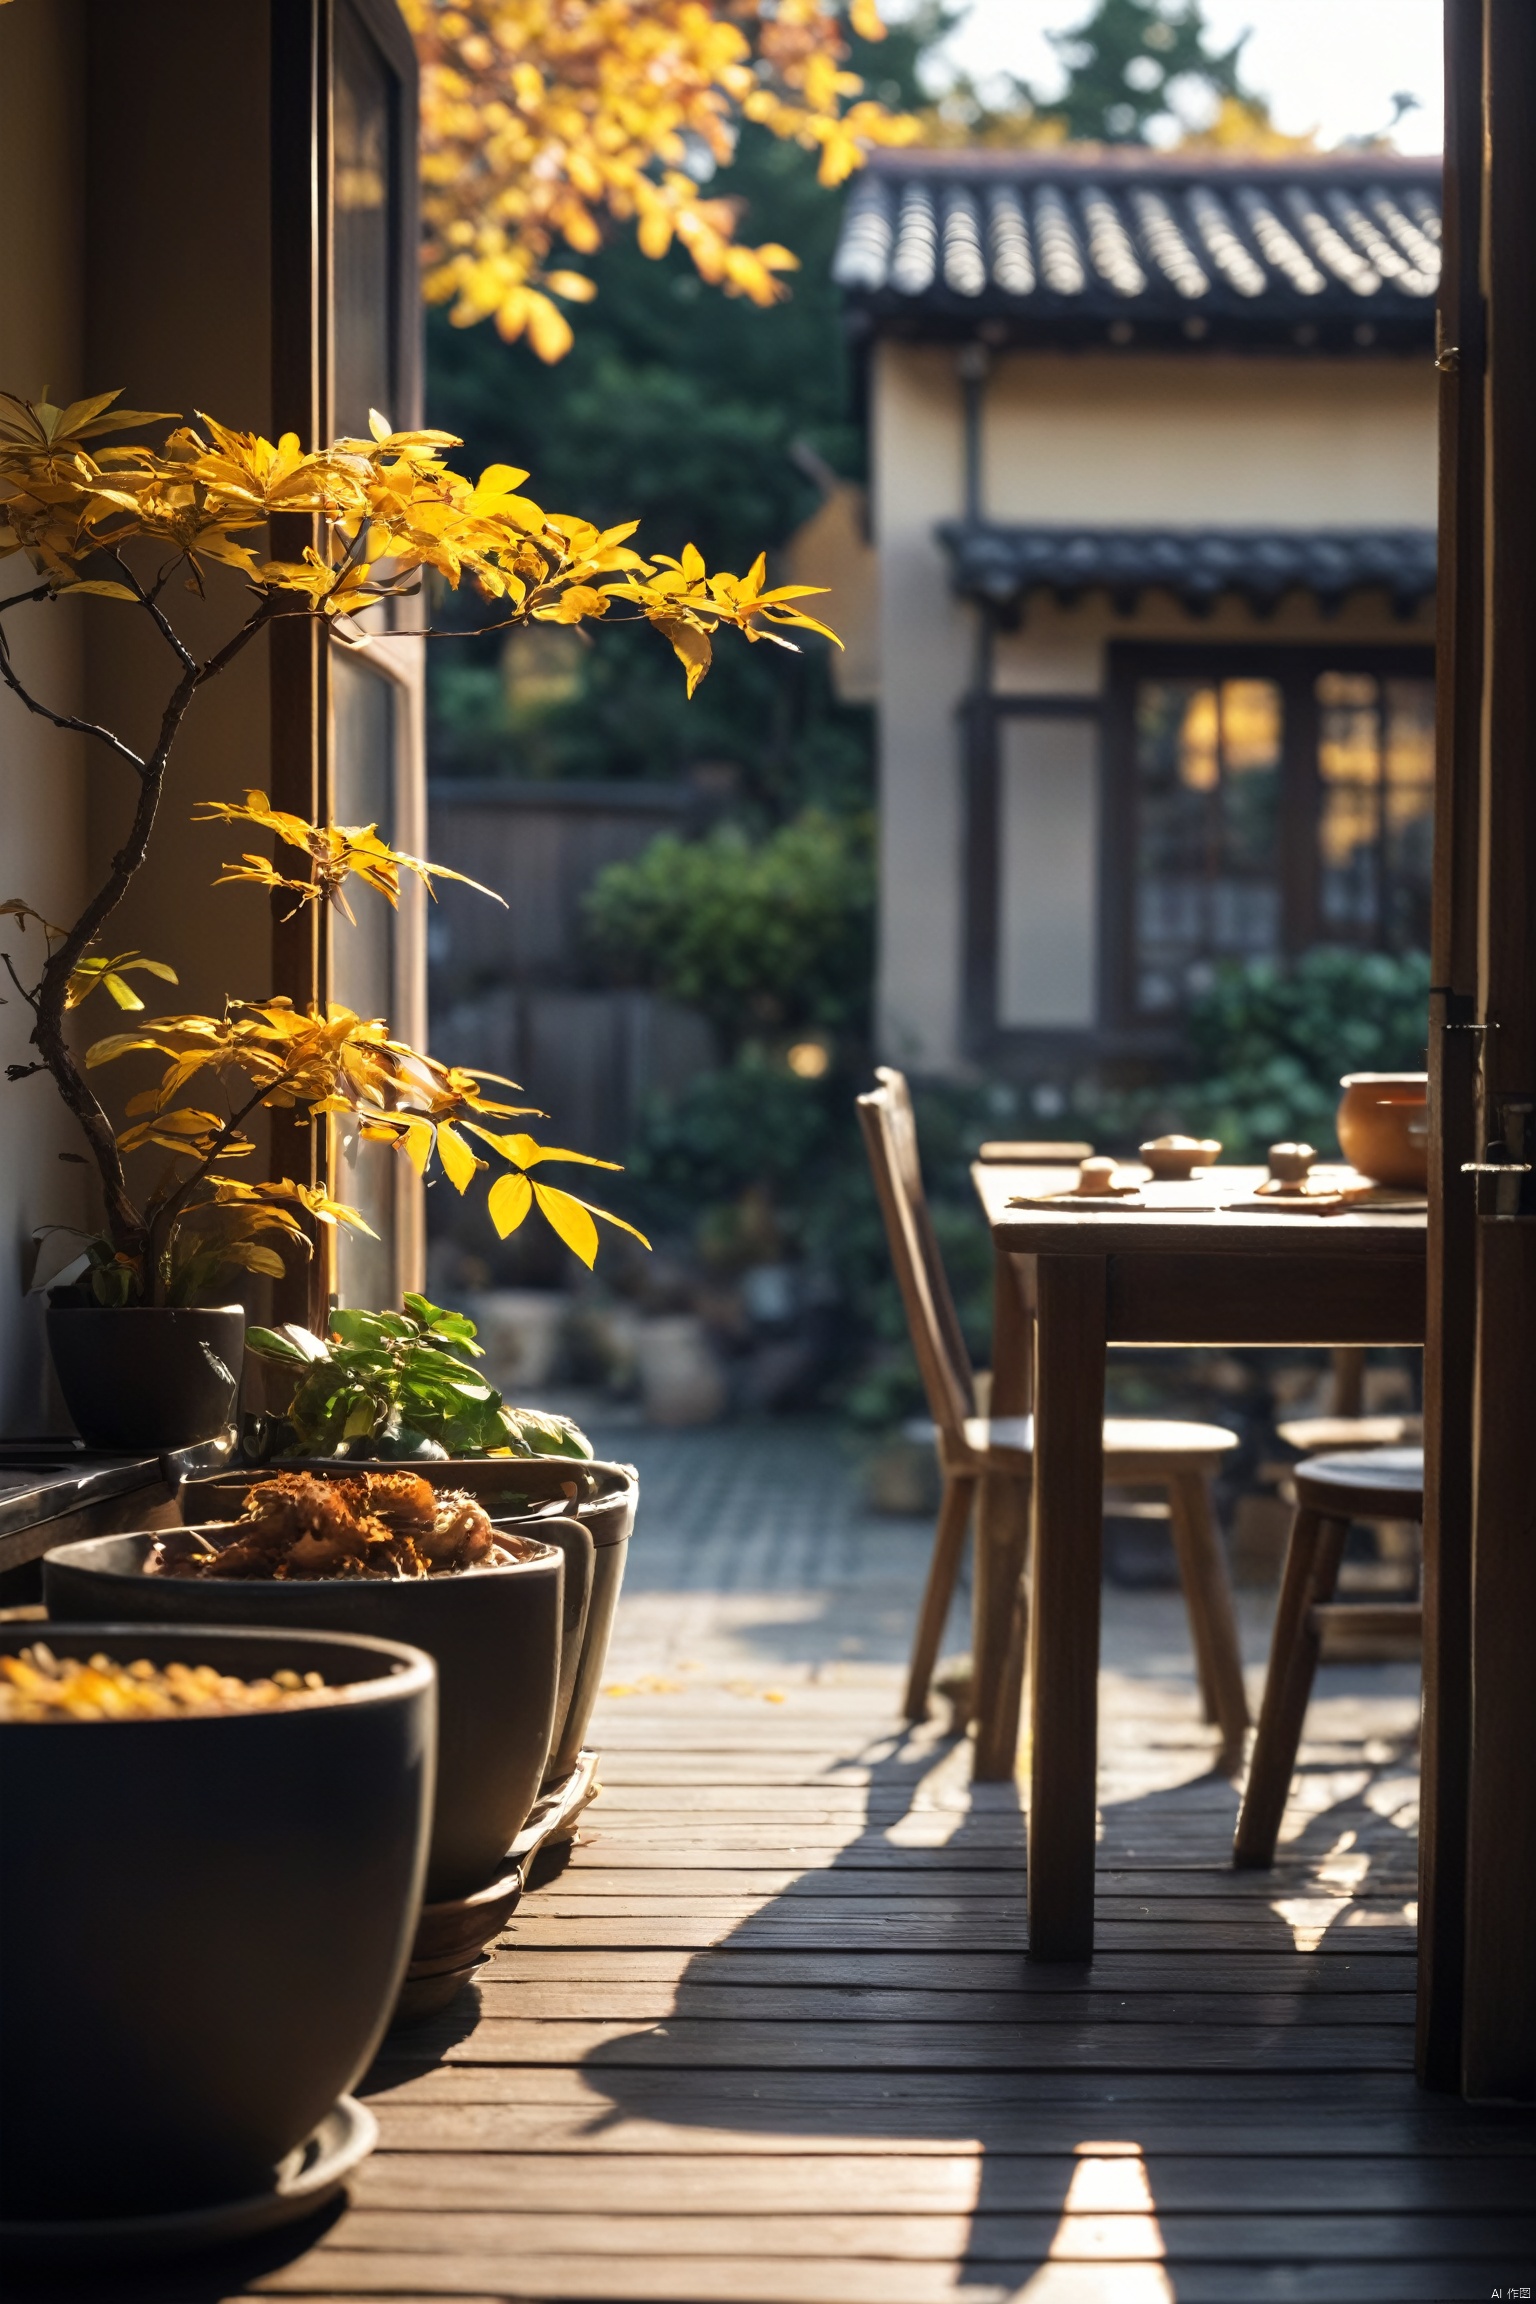  ((nobody)), countryside, autumn, fallen leaves, yellow leaves, landscape, indoor, (kitchen), house, door, window, yard, table and chairs, bowls and chopsticks, dish, outdoor, plant, potted plant, tree, flowerpot, miyazaki style,bokeh
, Light master, light master